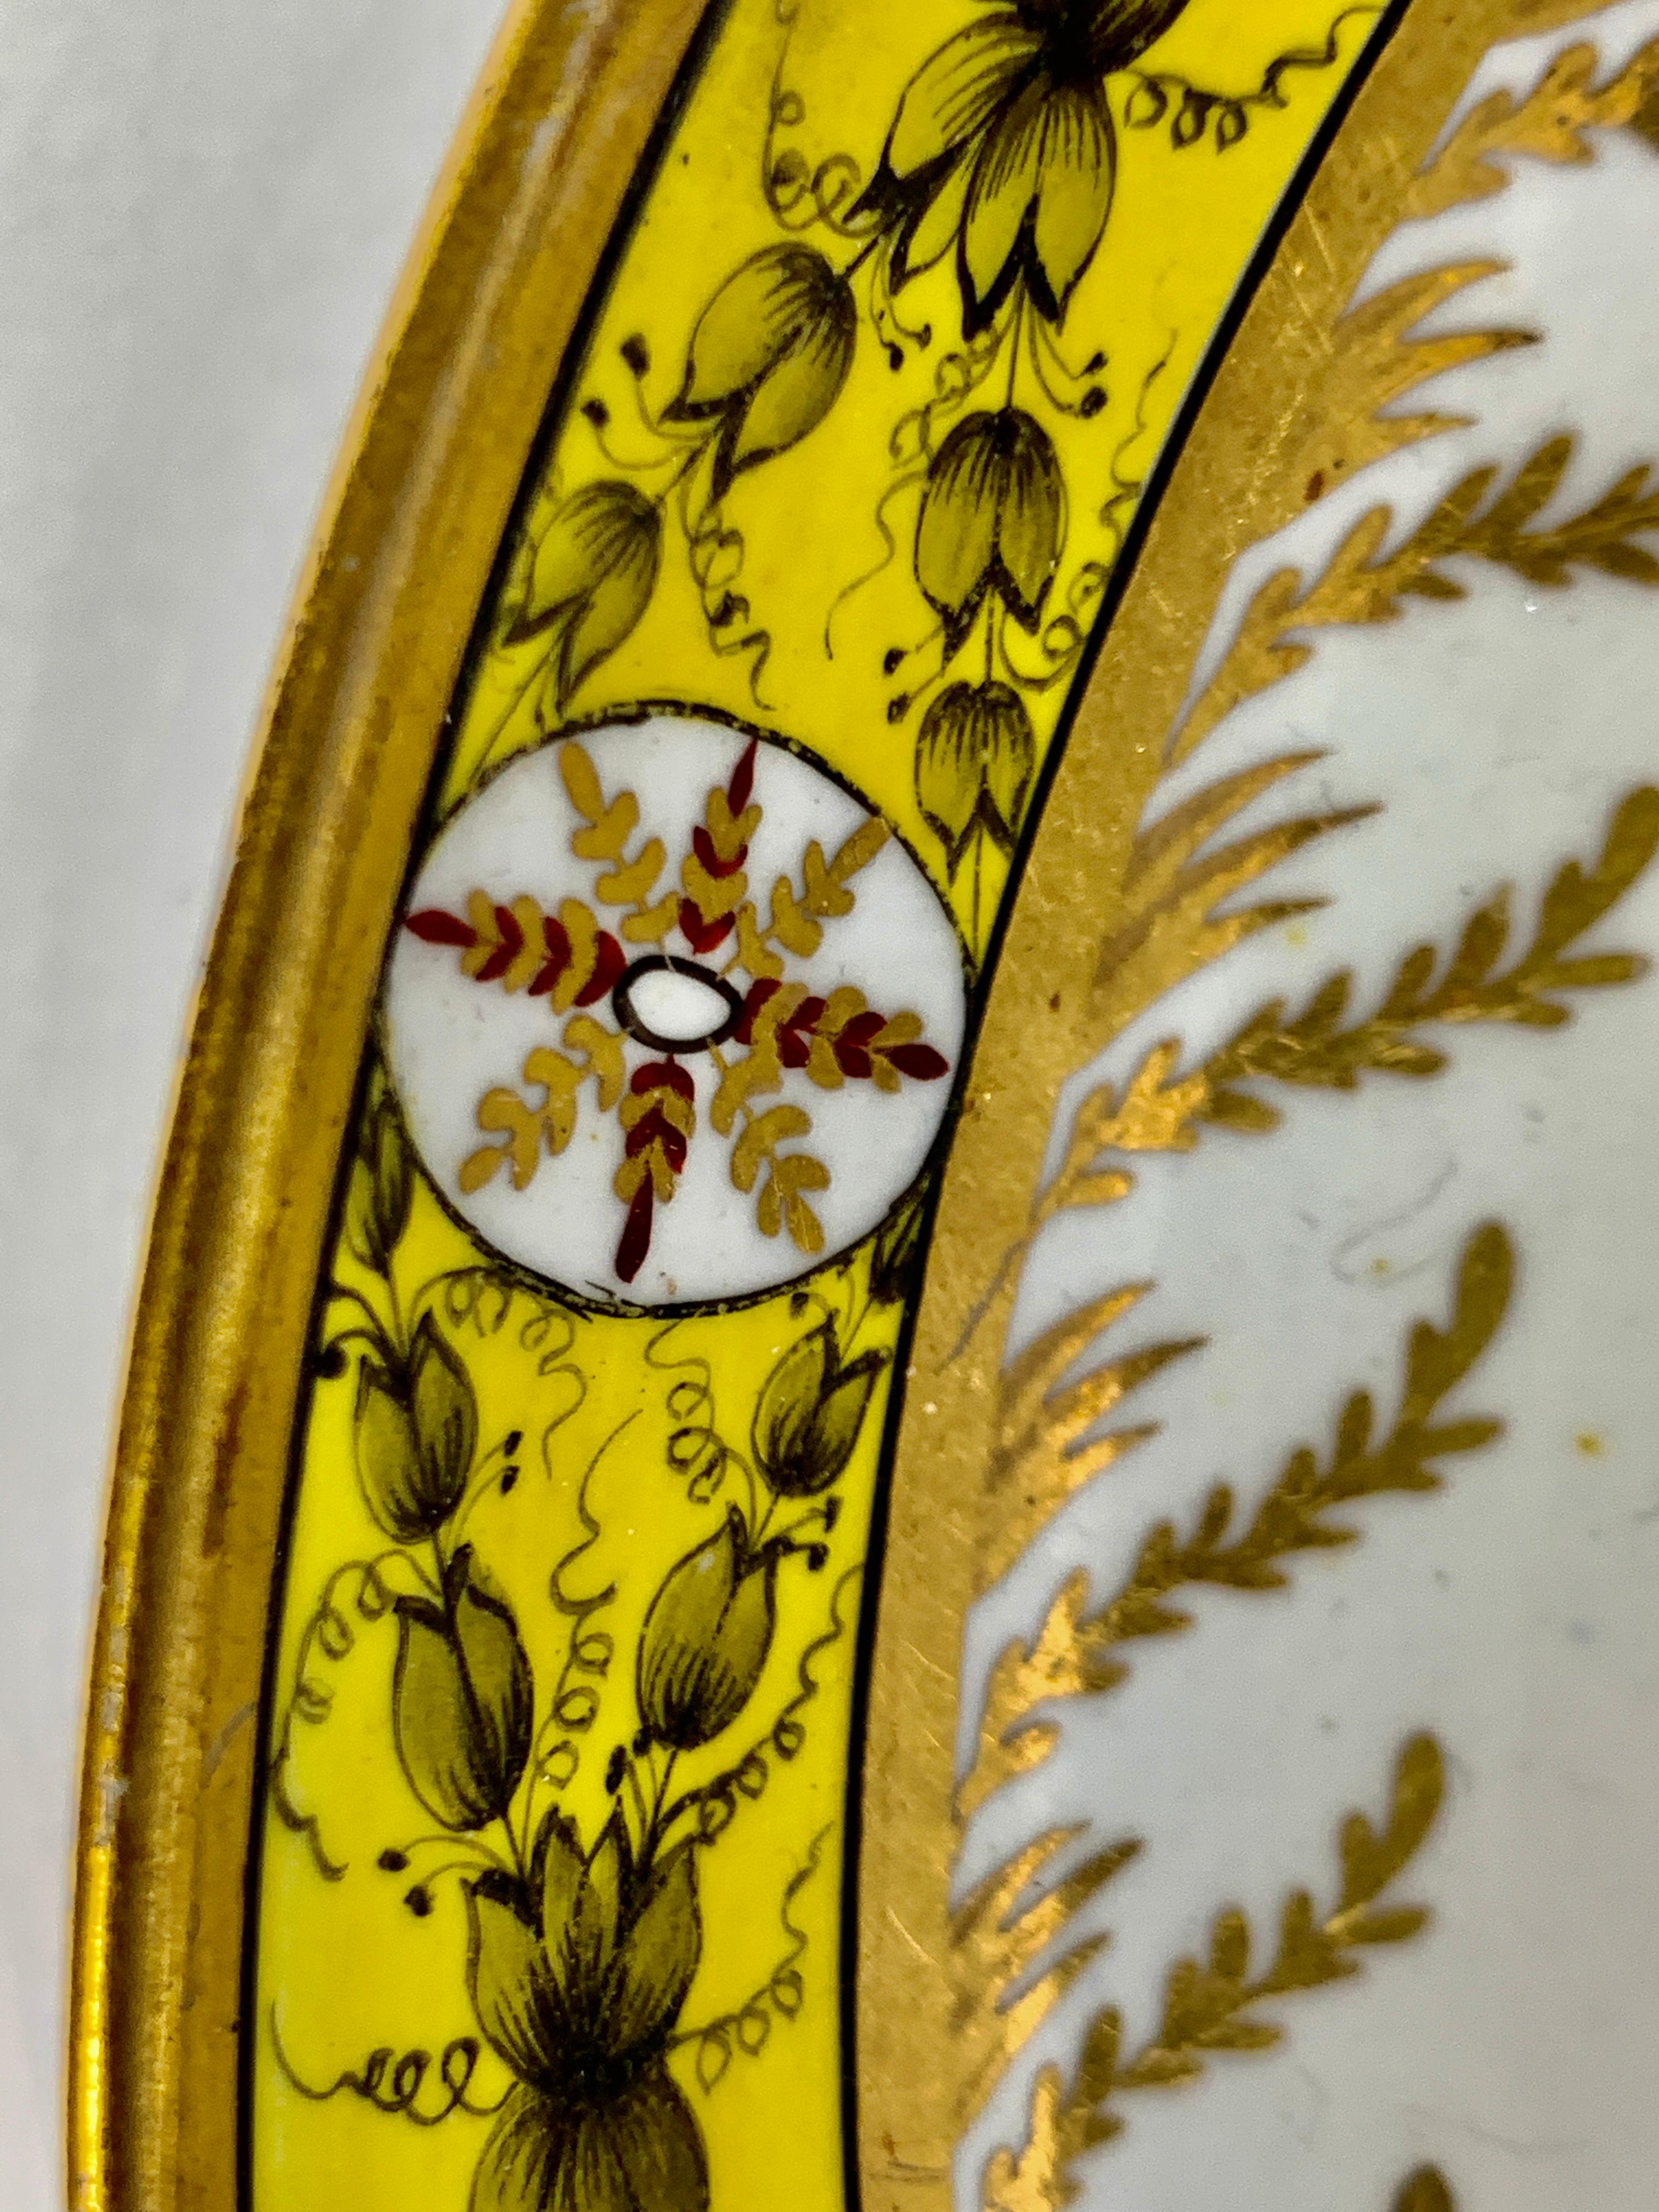 The border of this antique English porcelain dish has an exquisite yellow ground with an eye-catching design.
The neoclassical decoration is hand-painted. We see flower buds painted in grisaille, crisscrossing oval medallions.
Just beneath the